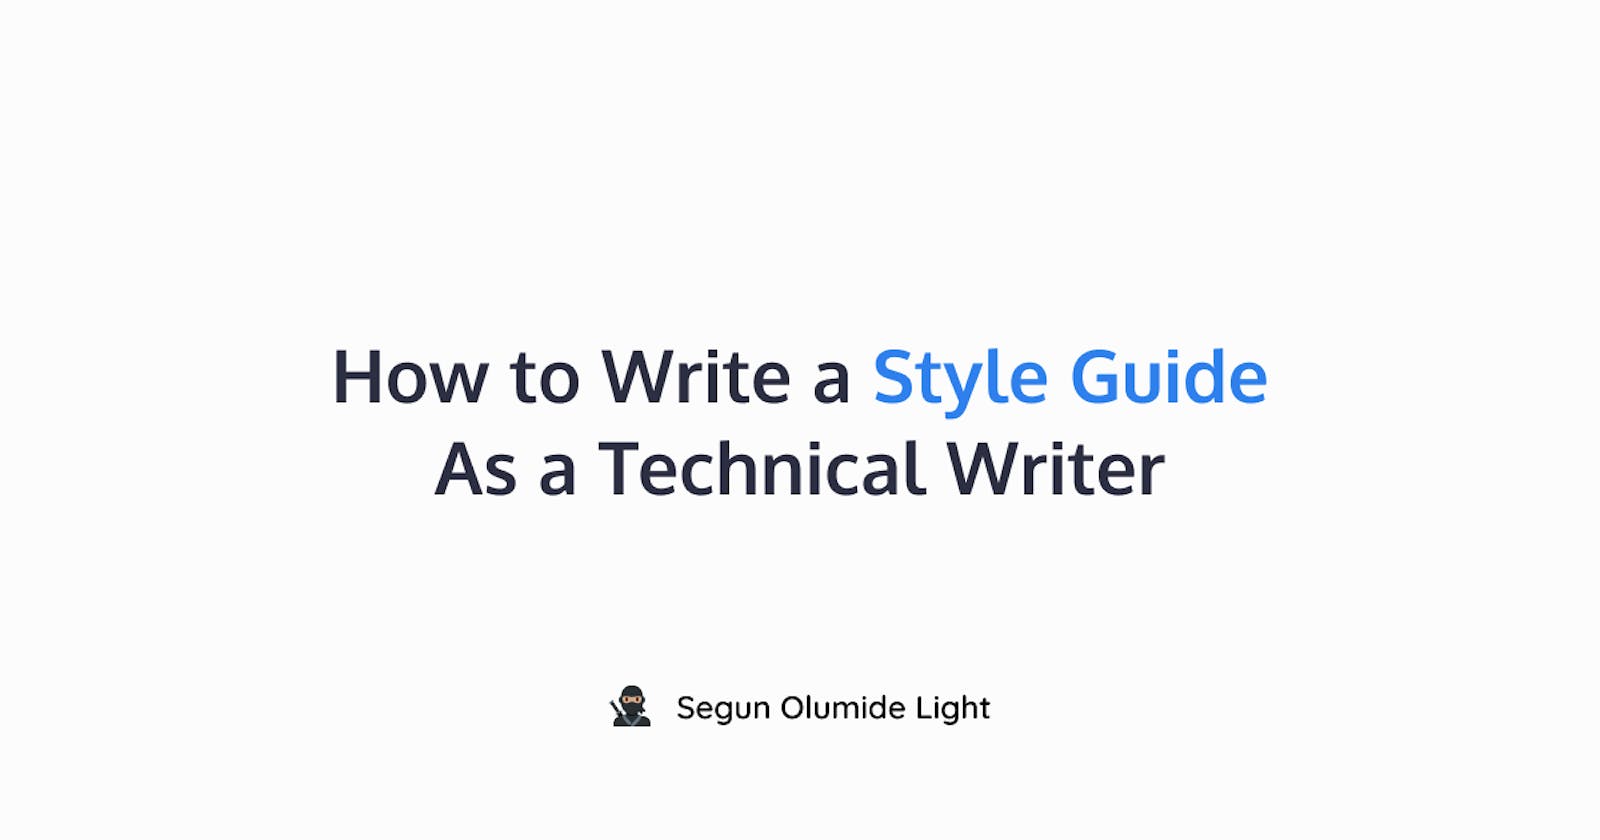 How to Write a Style Guide as a Technical Writer